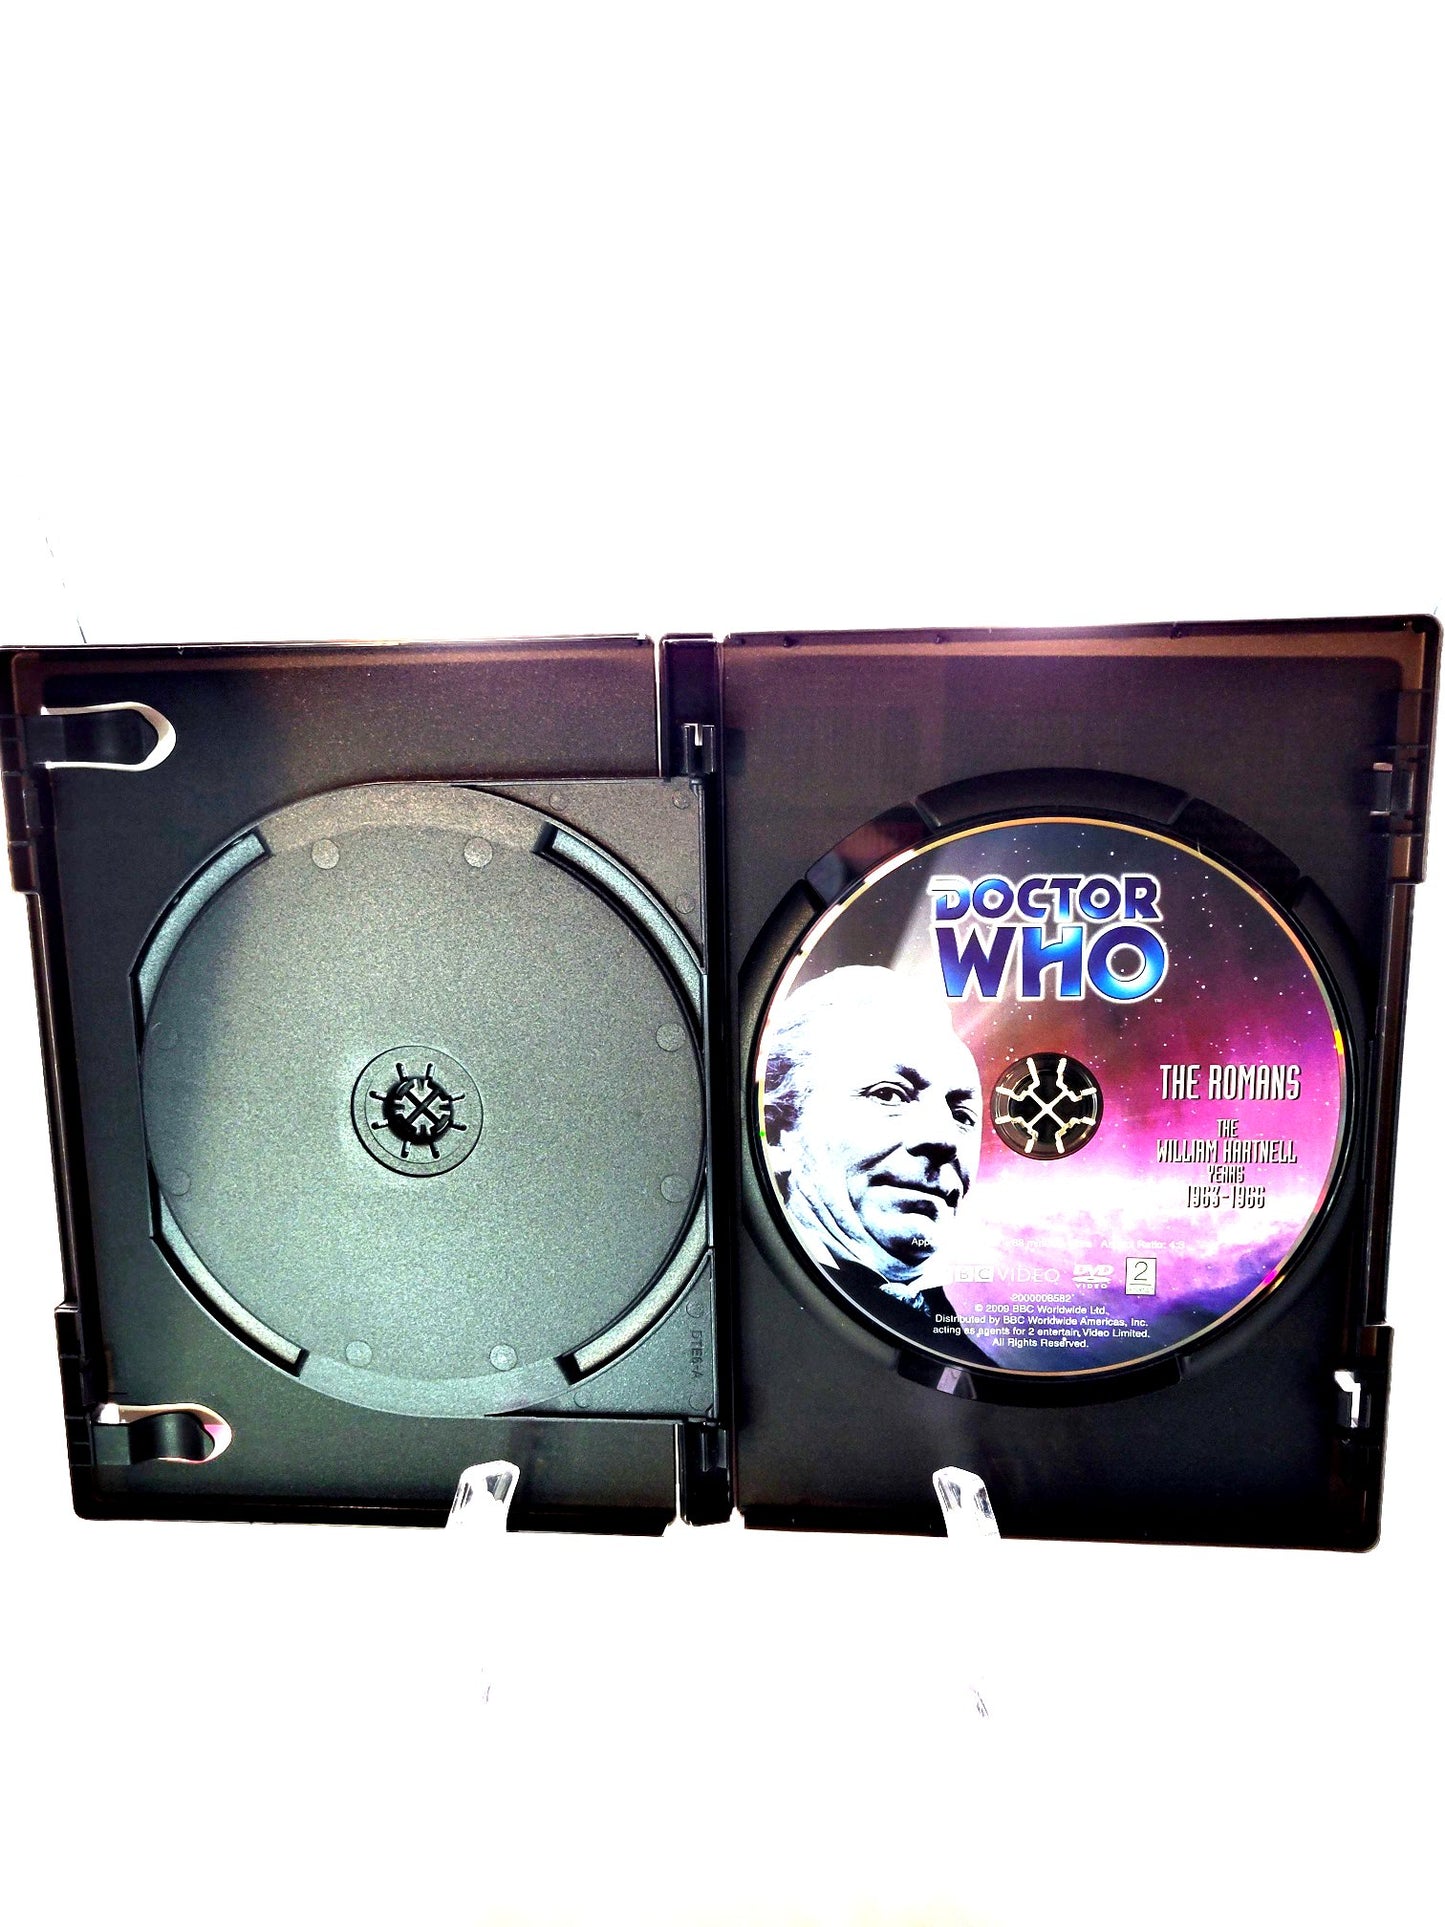 BBC Video Doctor Who The Rescue and The Romans DVD Set